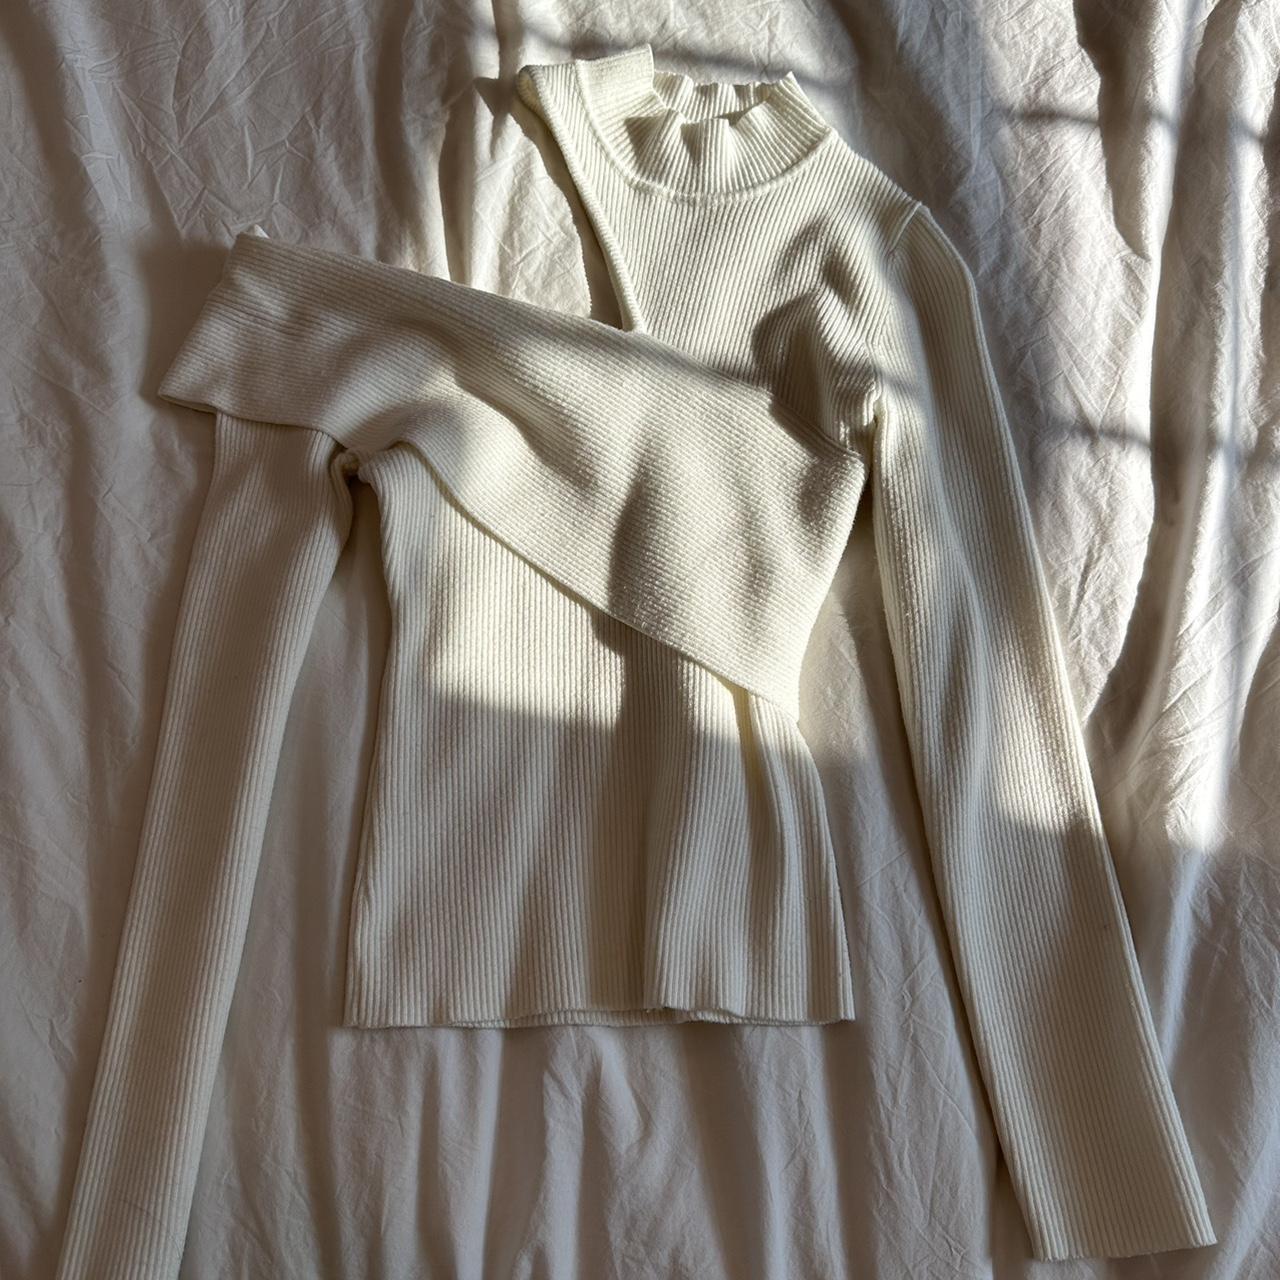 Sweater with an open slit off the shoulder - Depop